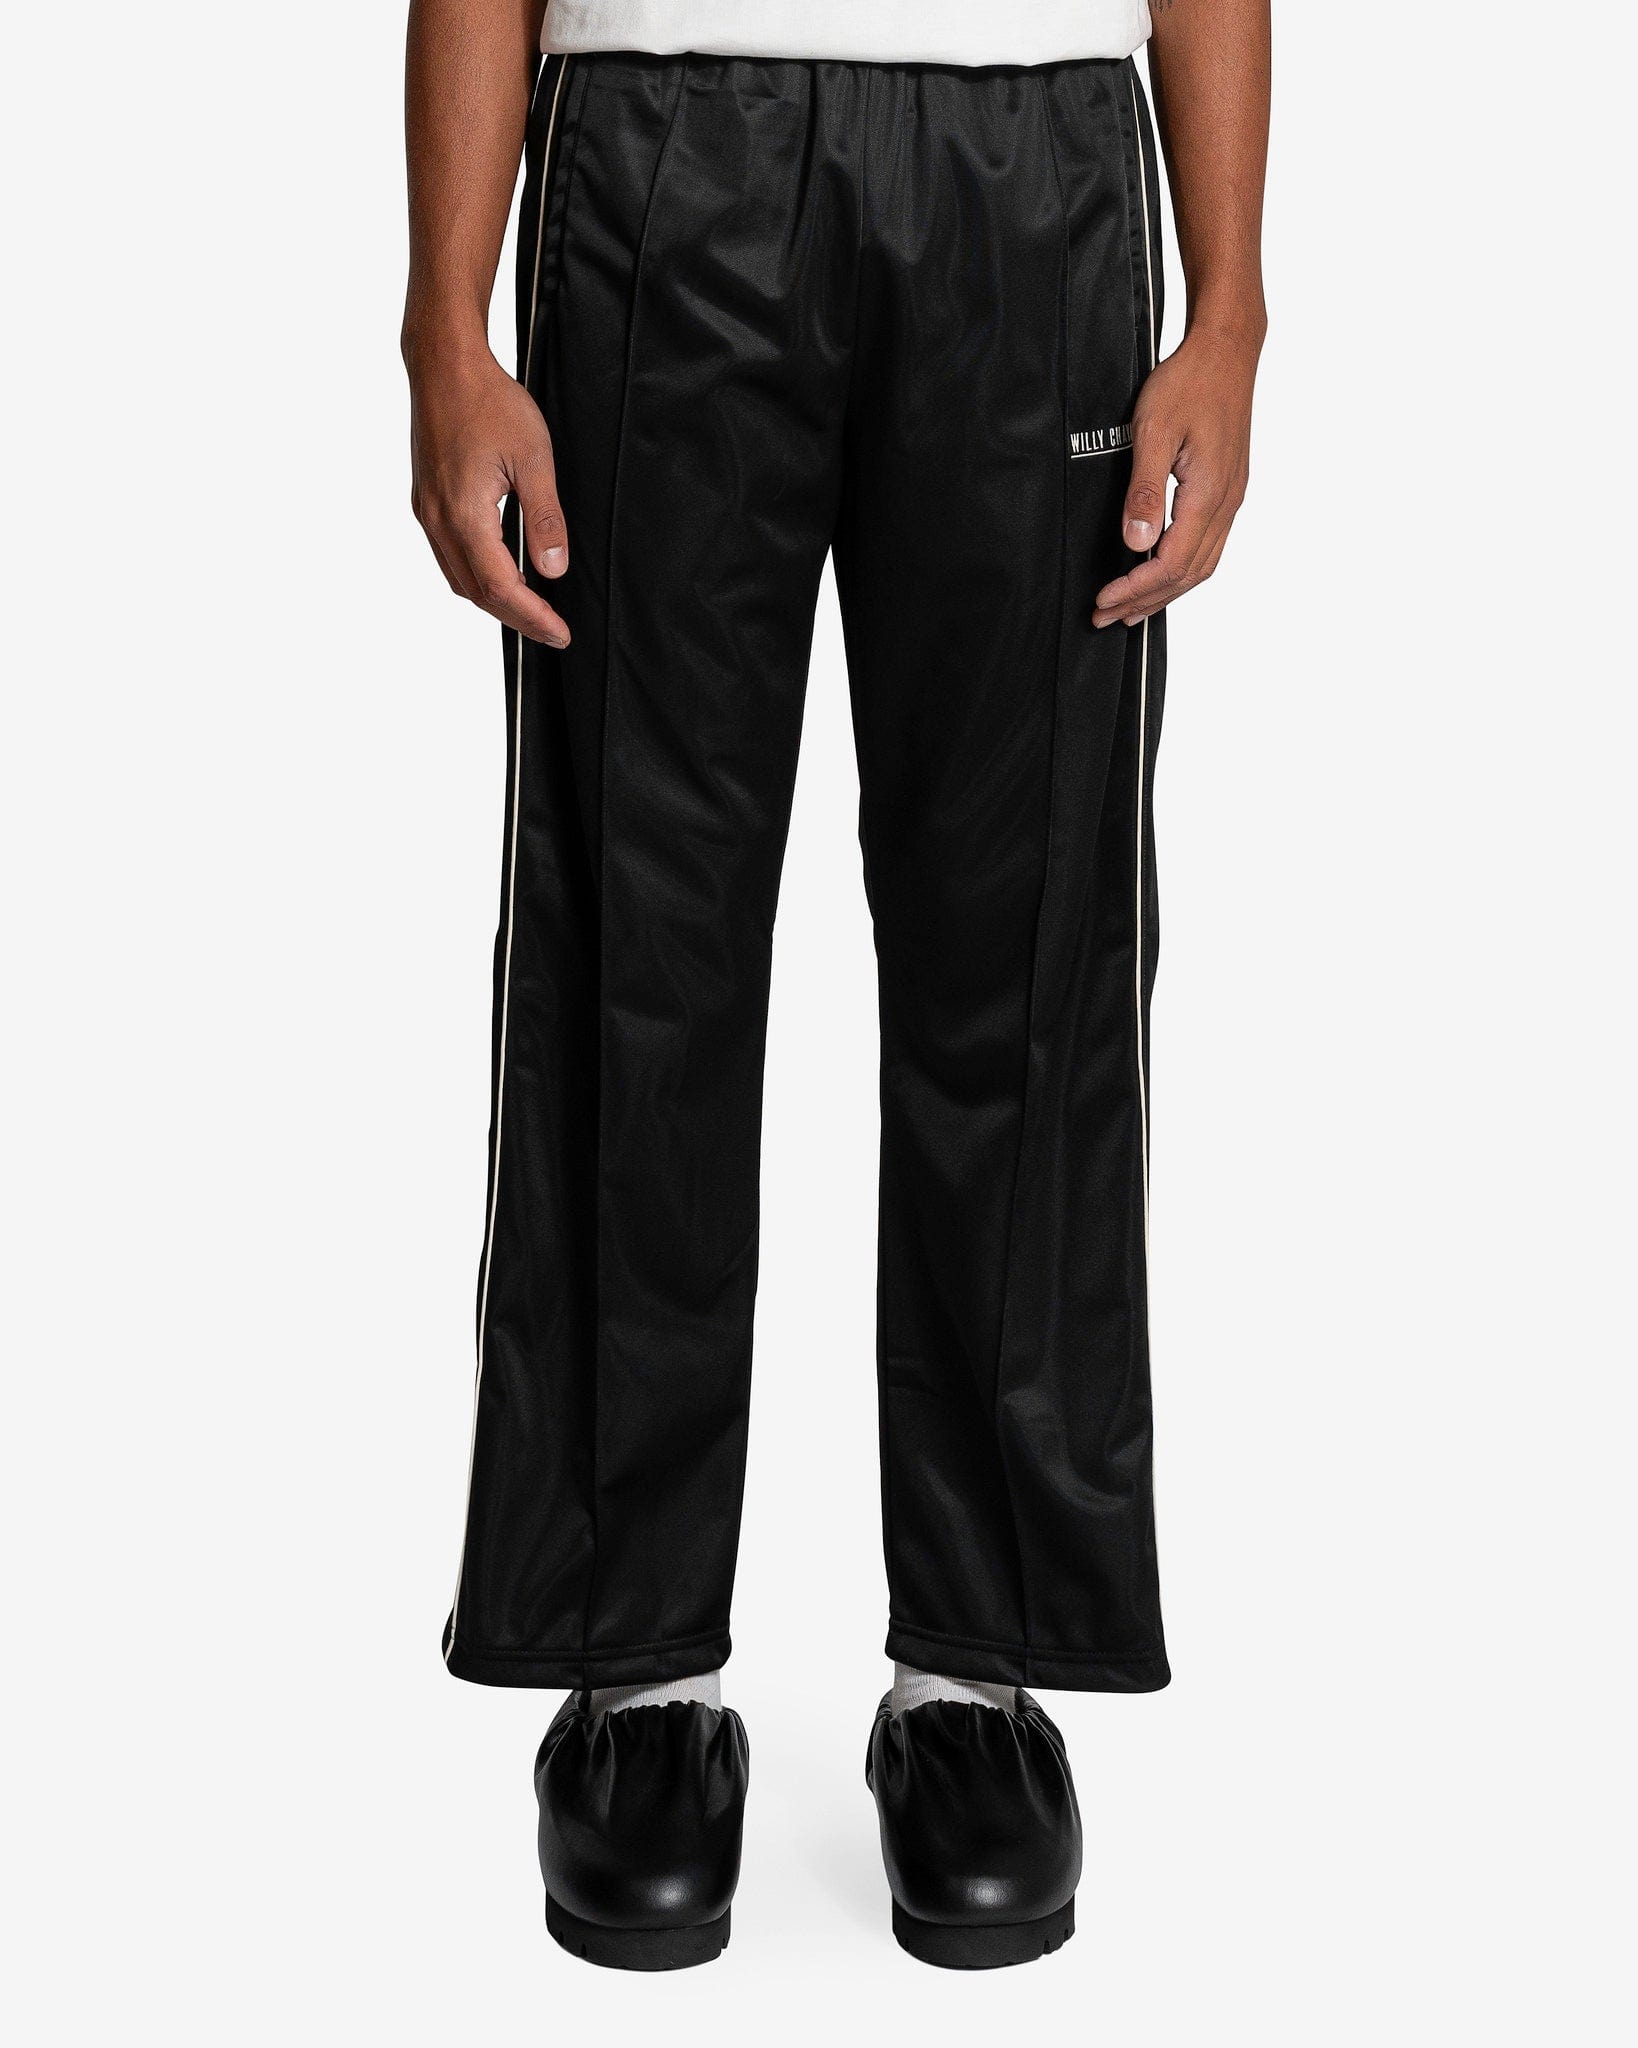 Willy Chavarria Men's Pants New Track Pants in Black